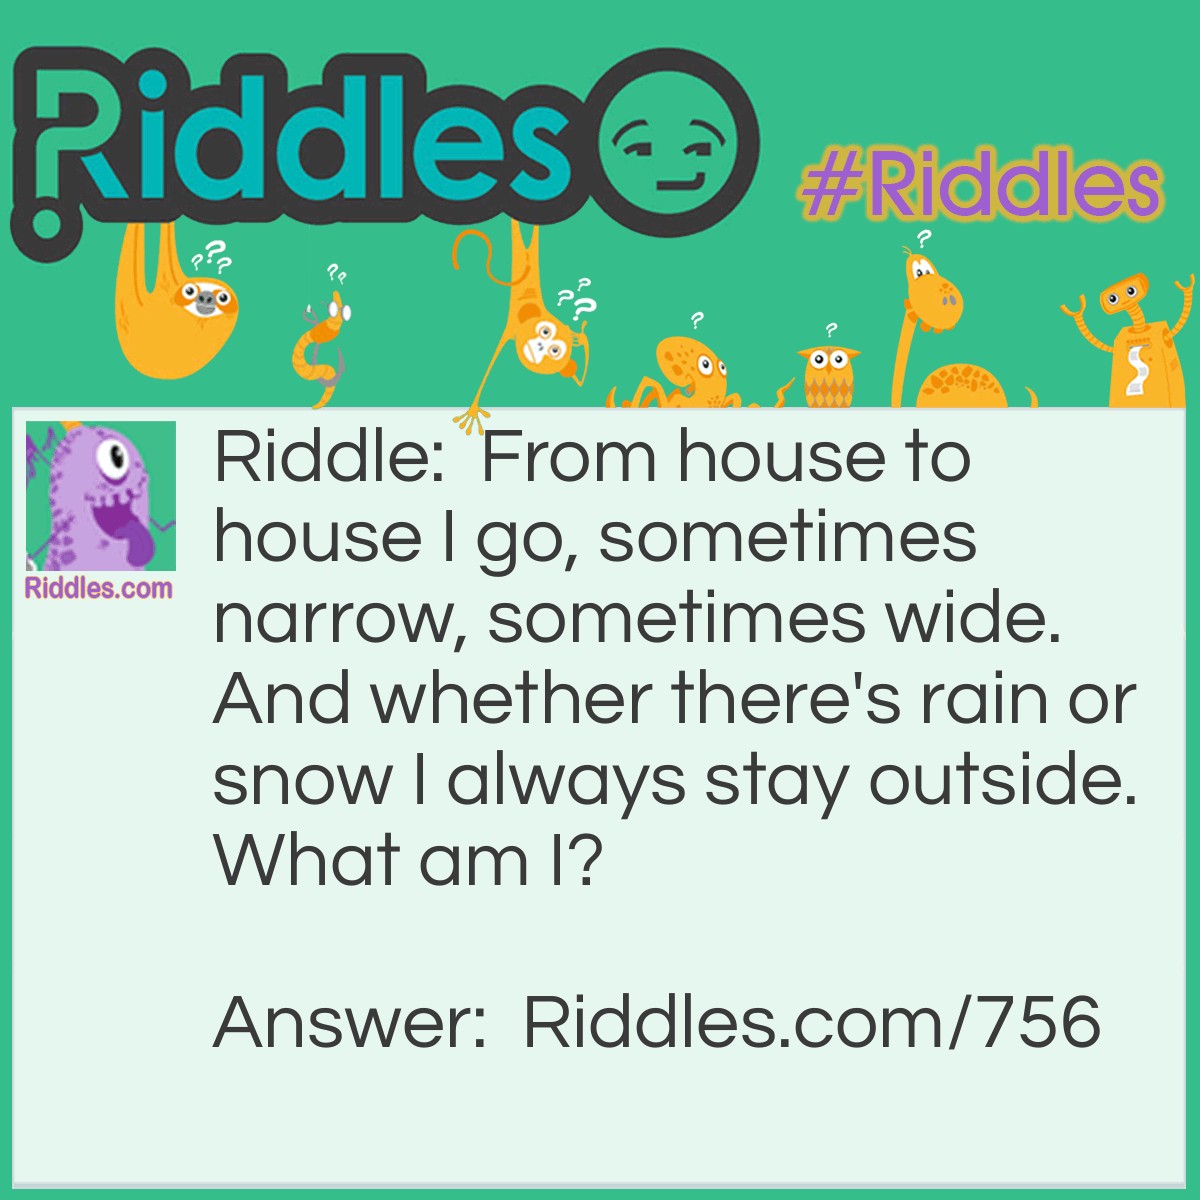 Riddle: From house to house I go, sometimes narrow, sometimes wide. And whether there's rain or snow I always stay outside.
What am I? Answer: A Path.